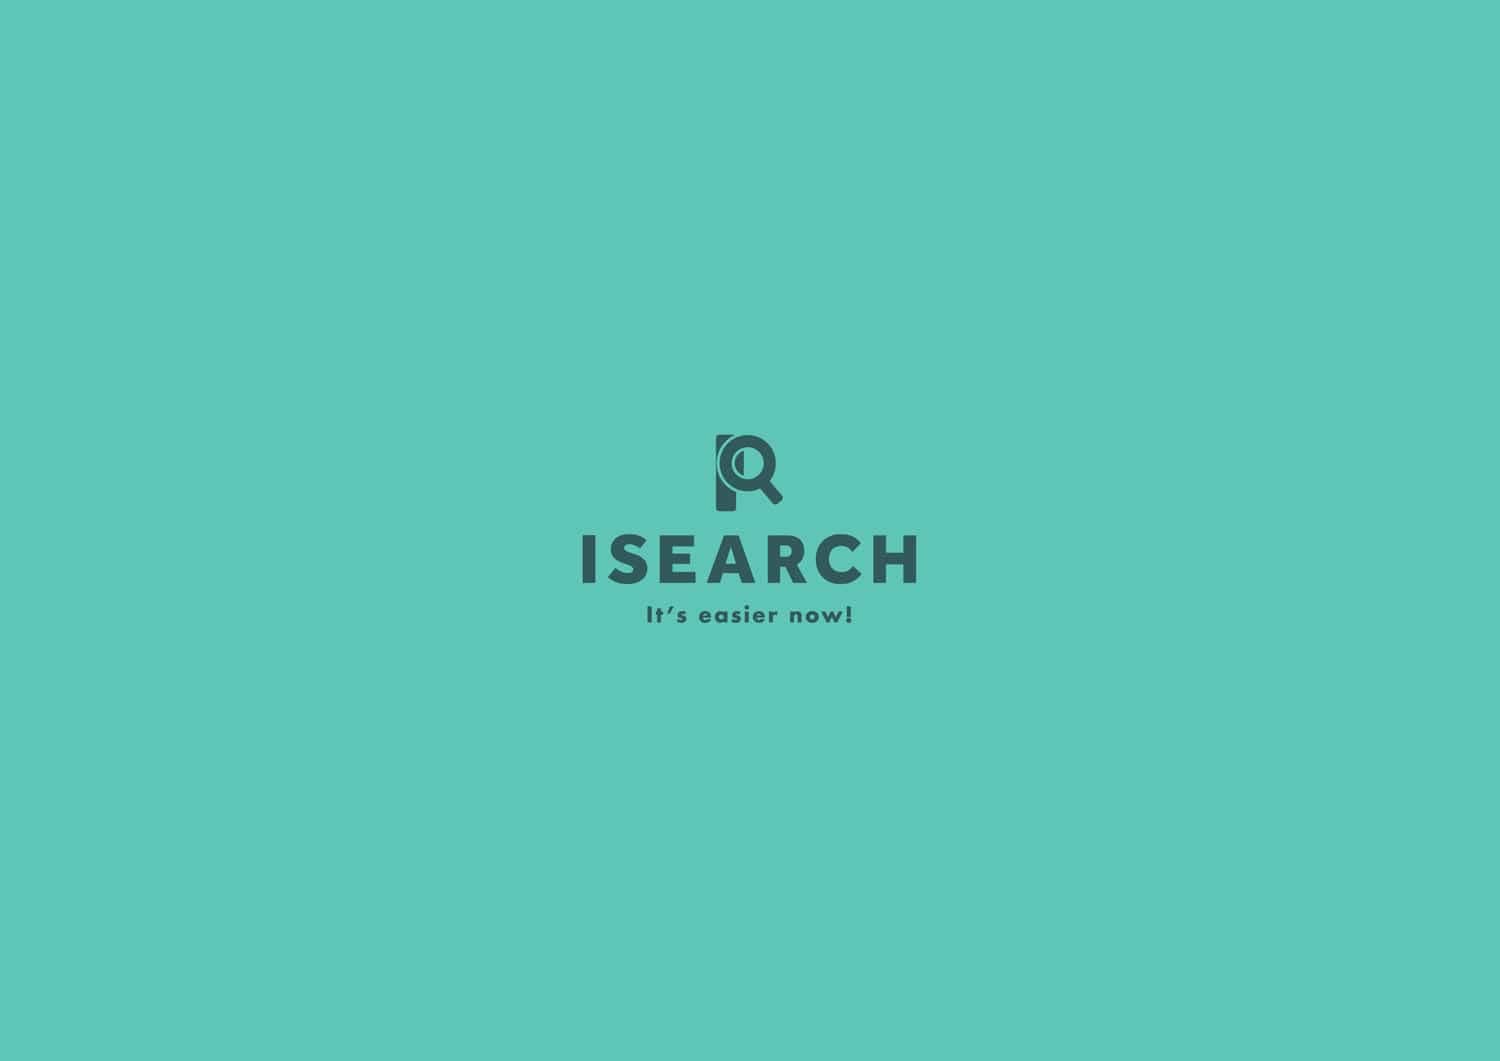 ISEARCH logo color green1